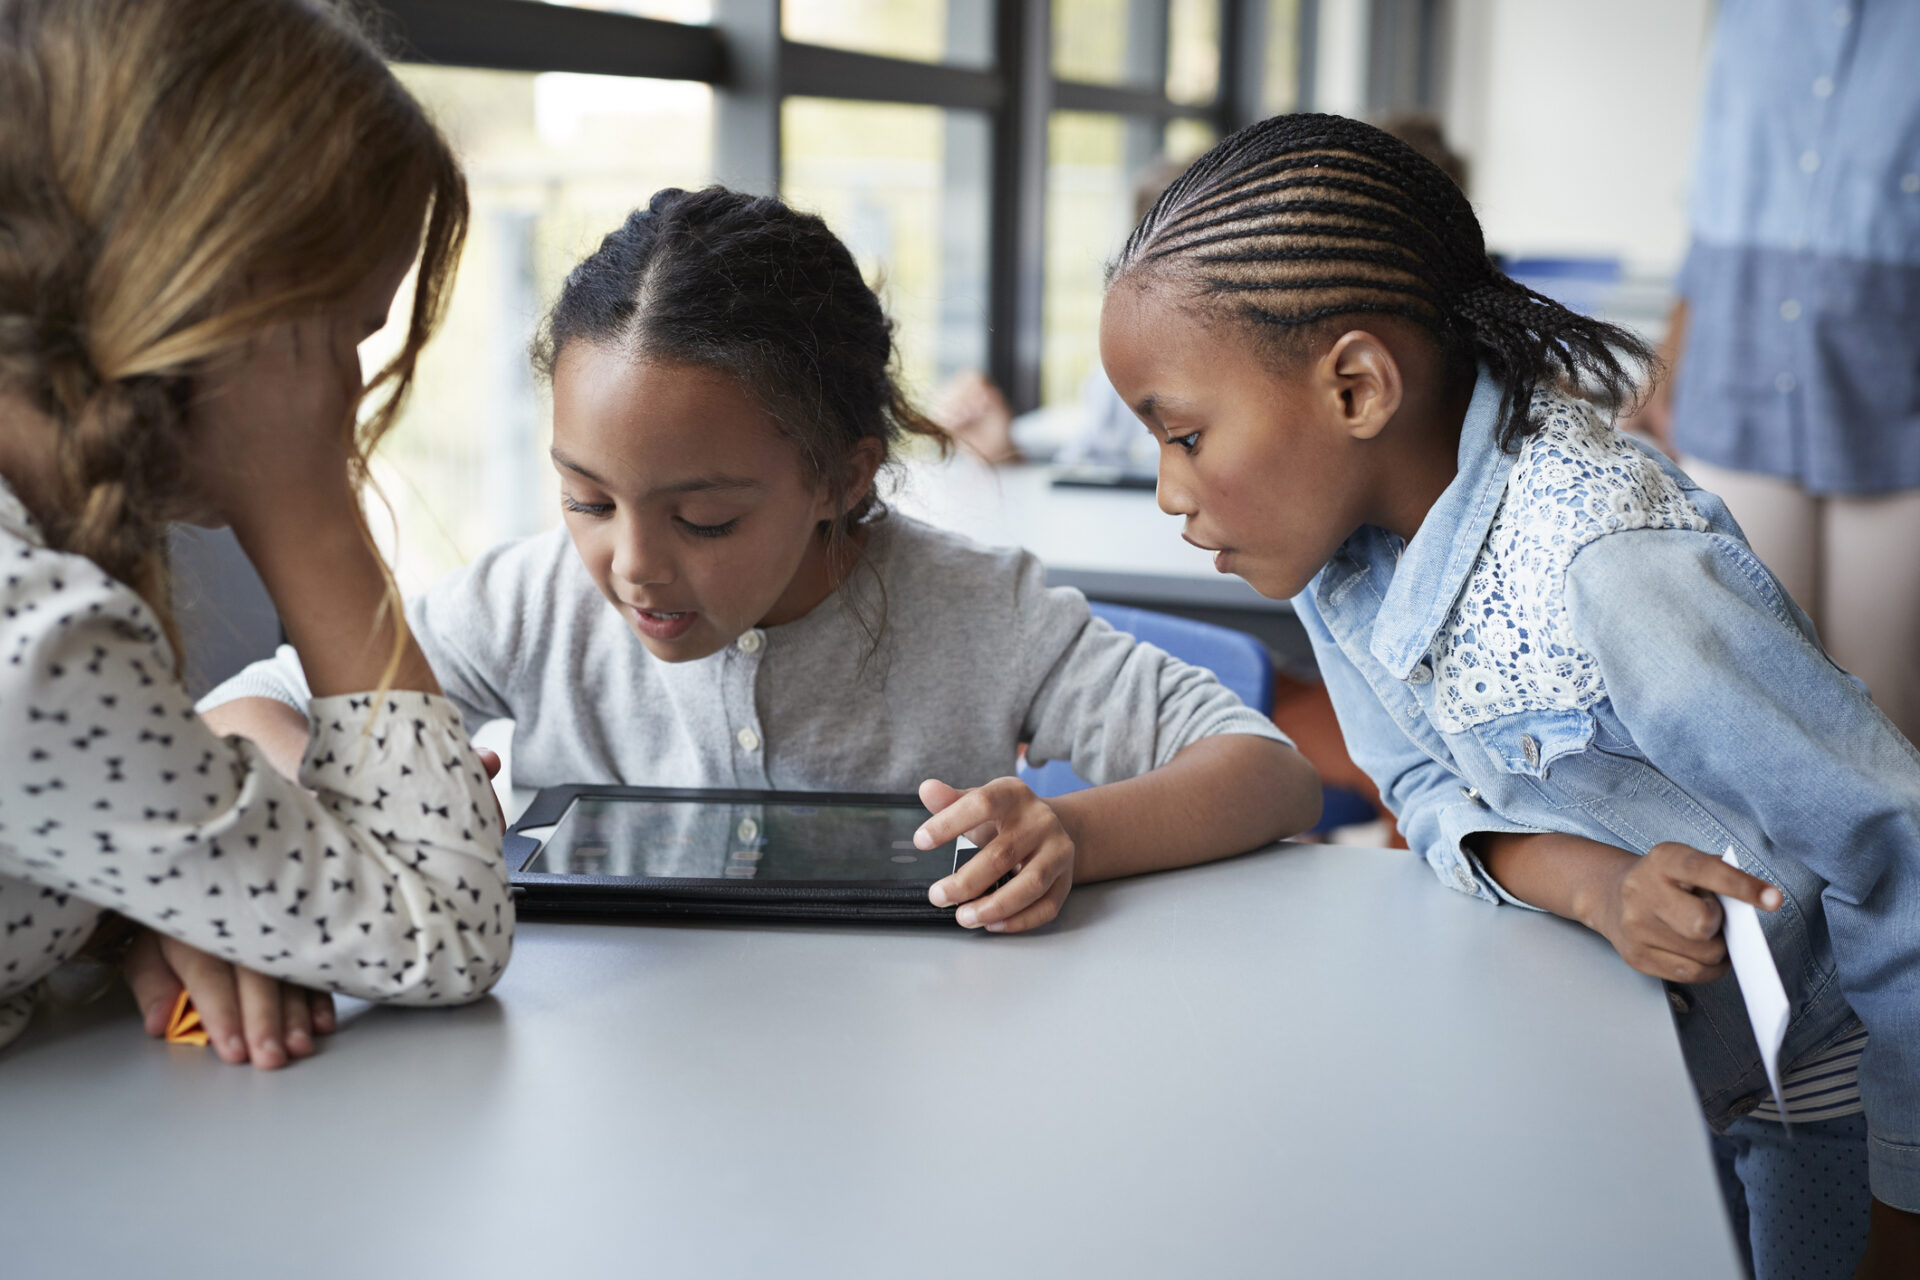 How to Use Gameplay to Enhance Classroom Learning